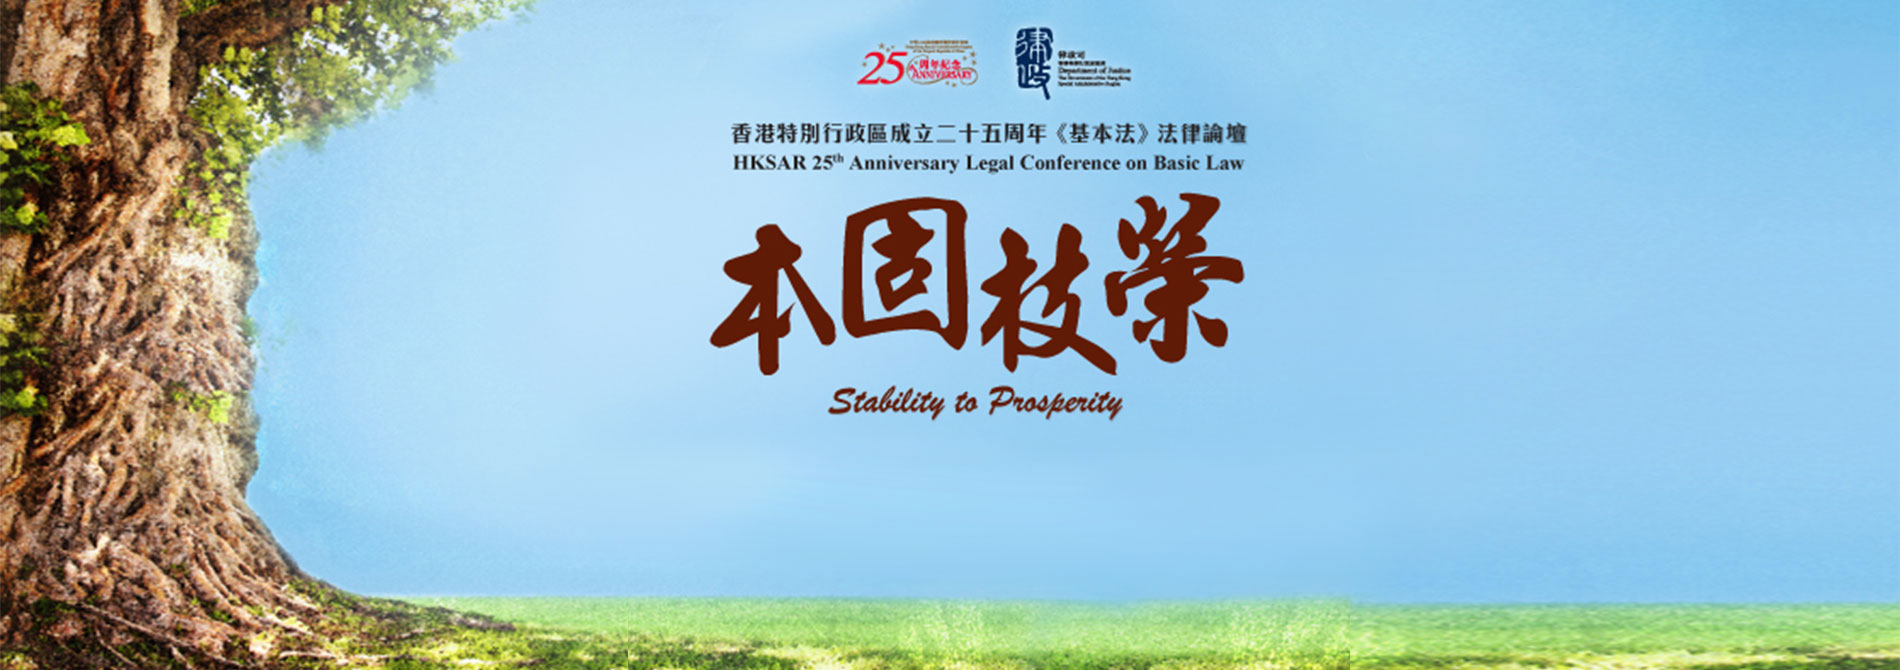 Legal Conference on Basic Law - Stability to Prosperity